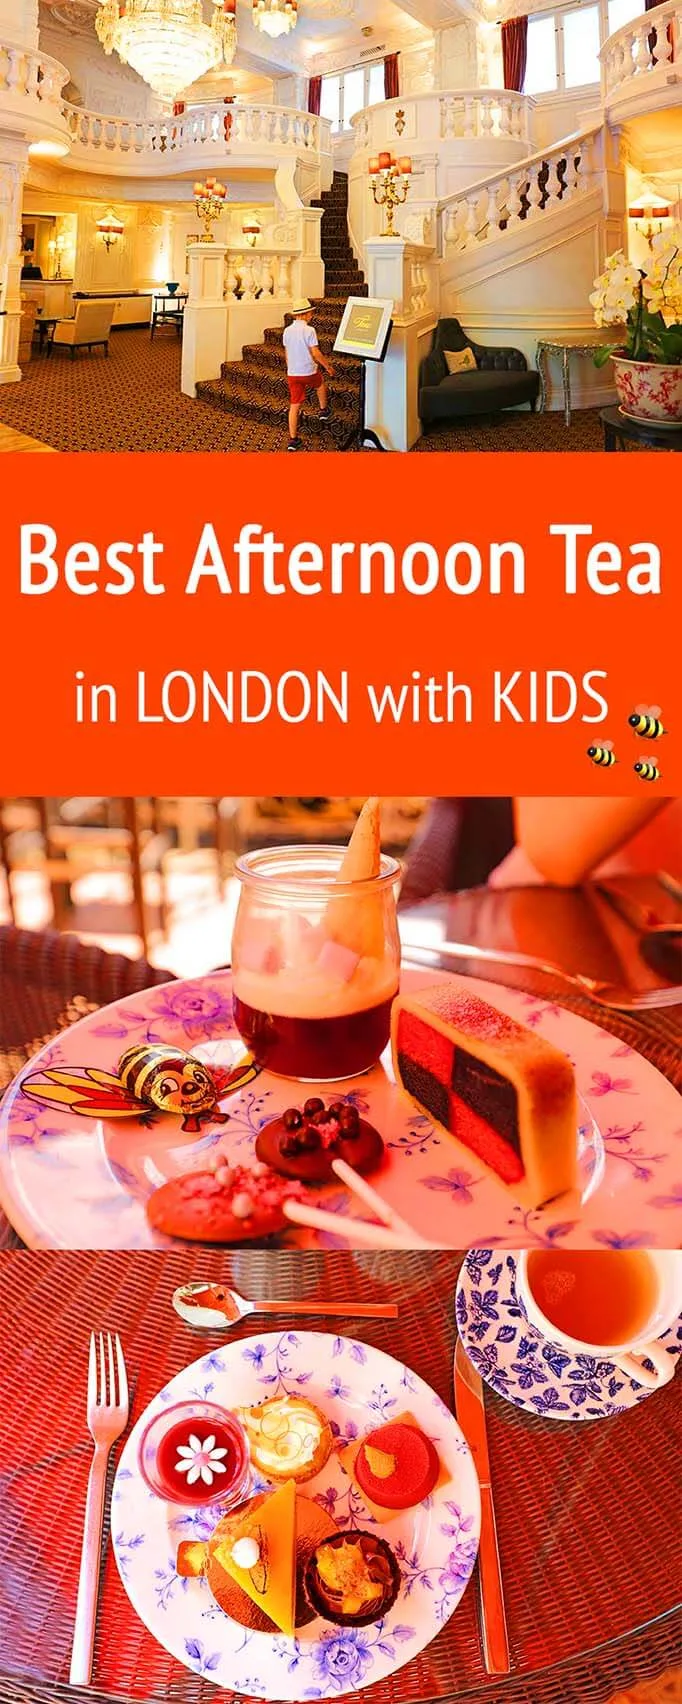 Where to find the best afternoon tea experience in London for families with kids